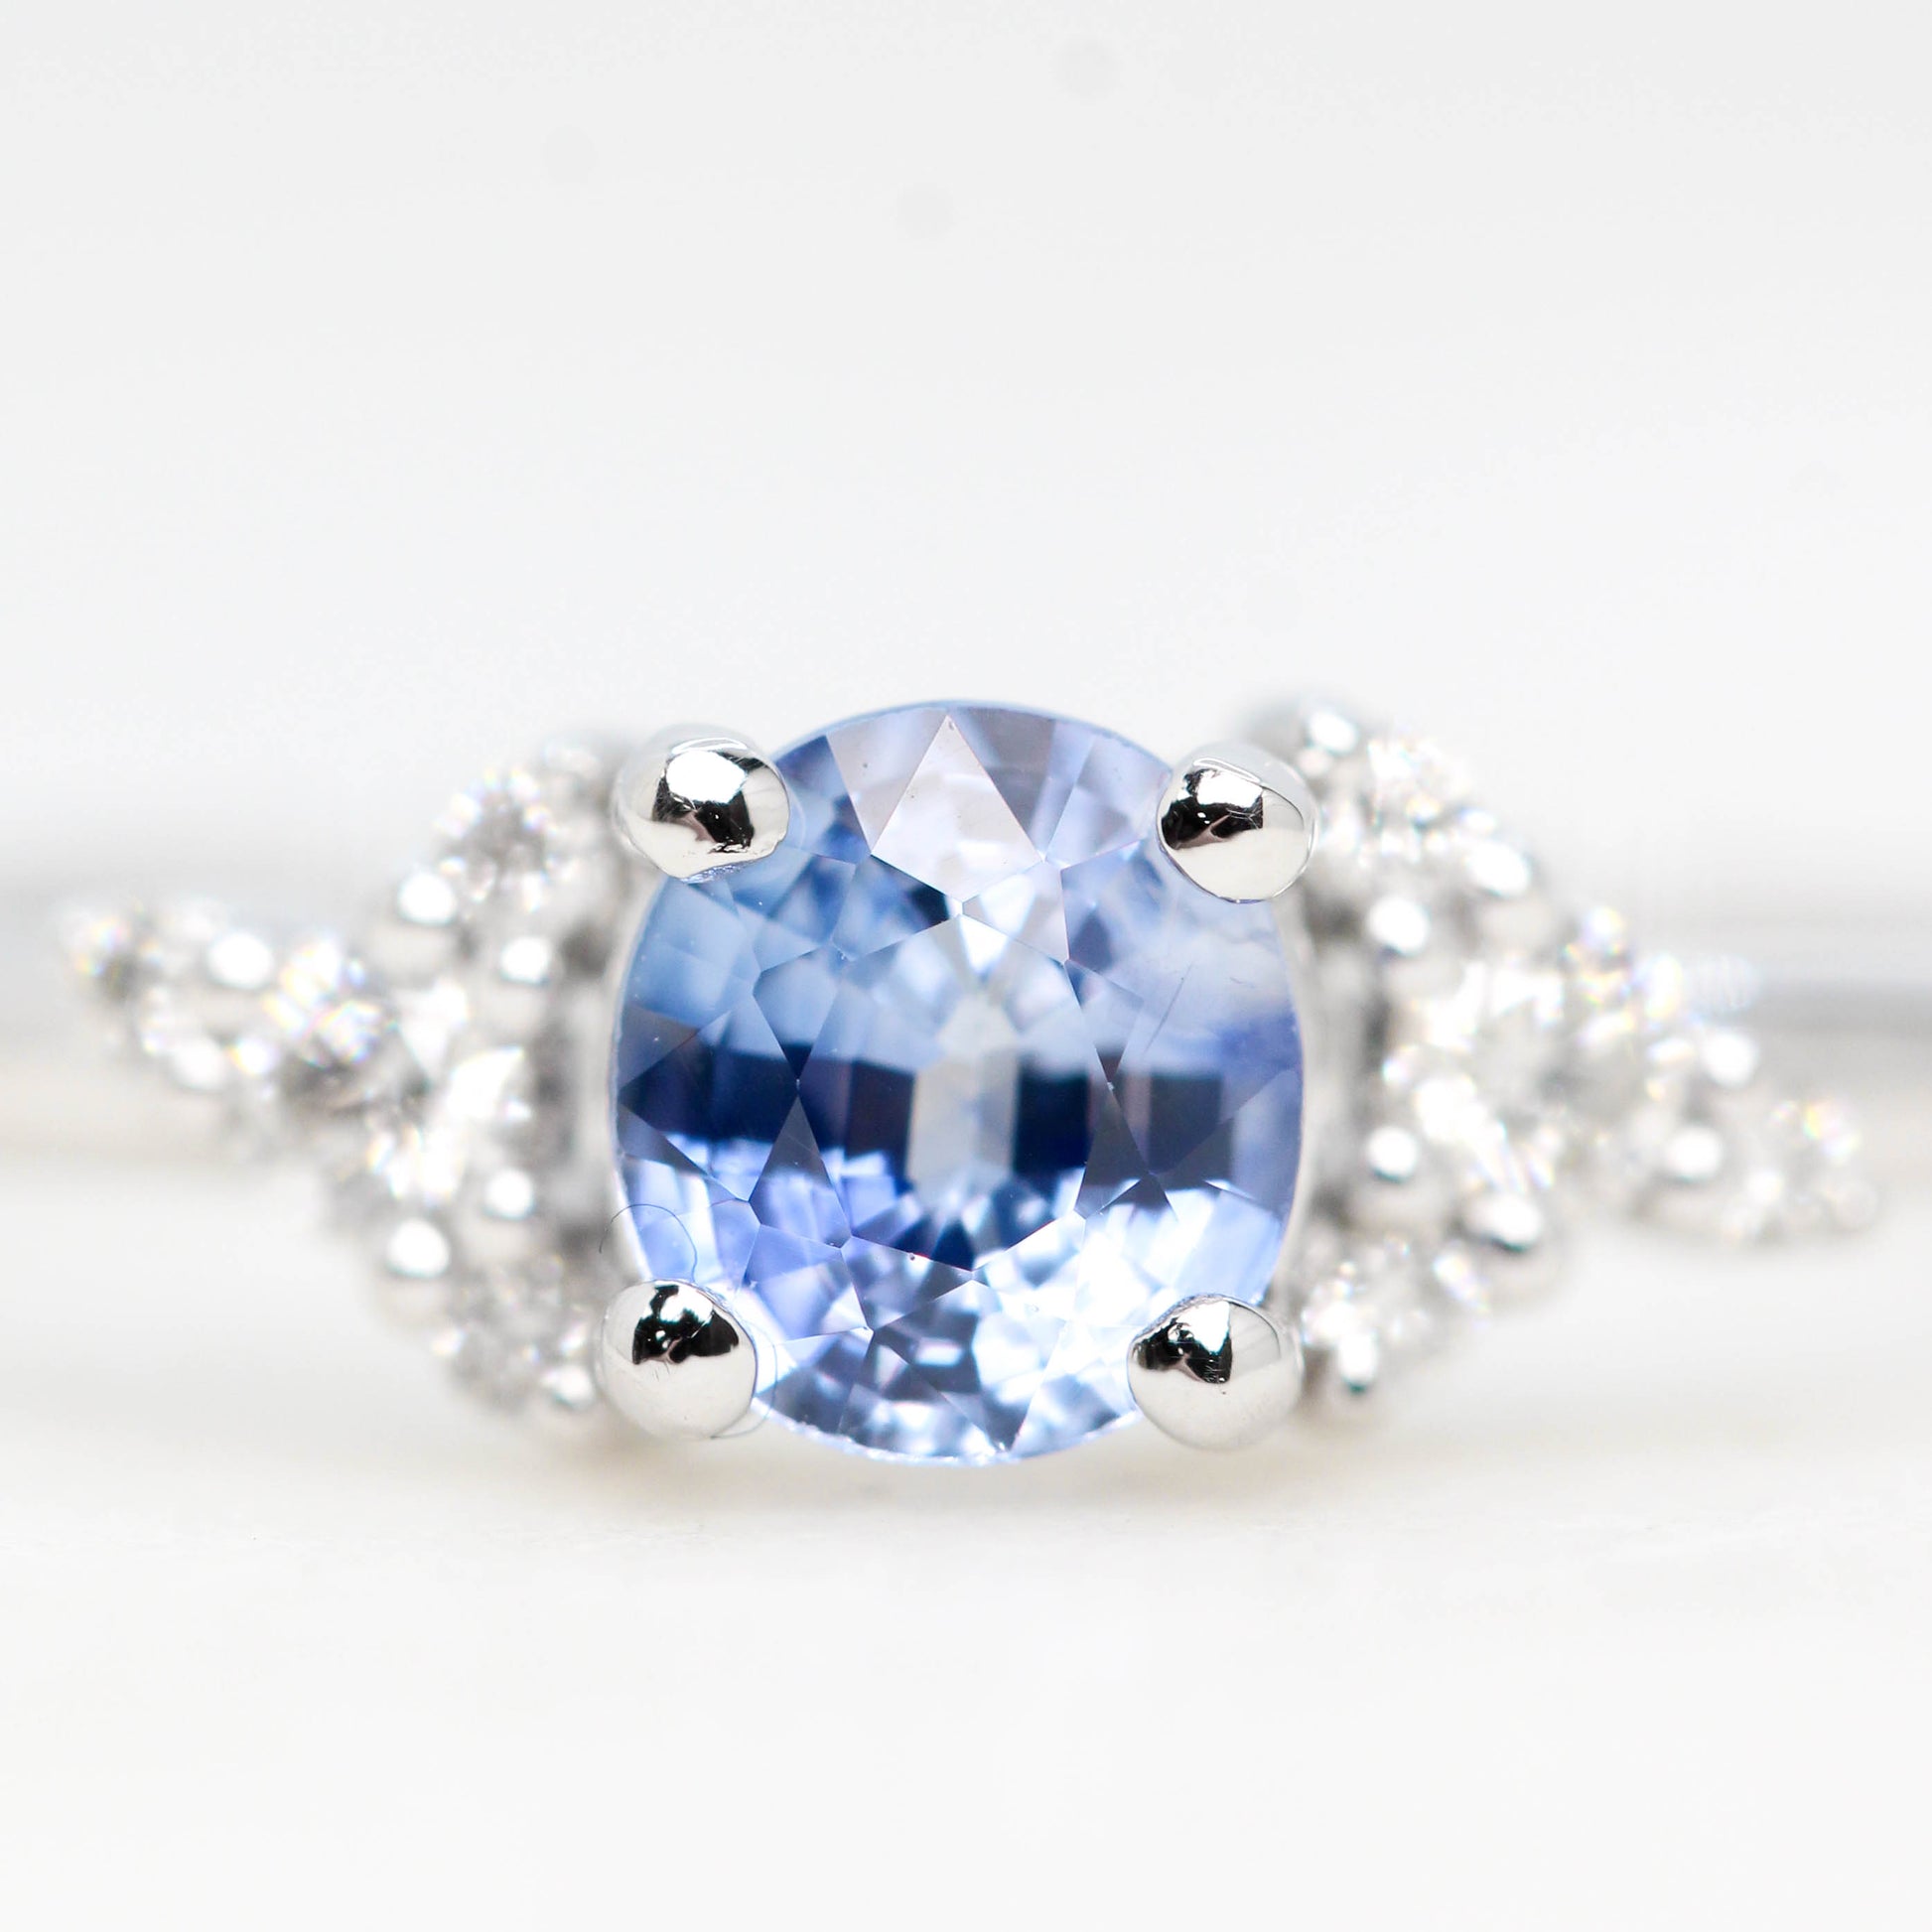 Marley Ring with a 0.60 Carat Round Blue Montana Sapphire and White Accent Diamonds in 14k White Gold - Ready to Size and Ship - Midwinter Co. Alternative Bridal Rings and Modern Fine Jewelry